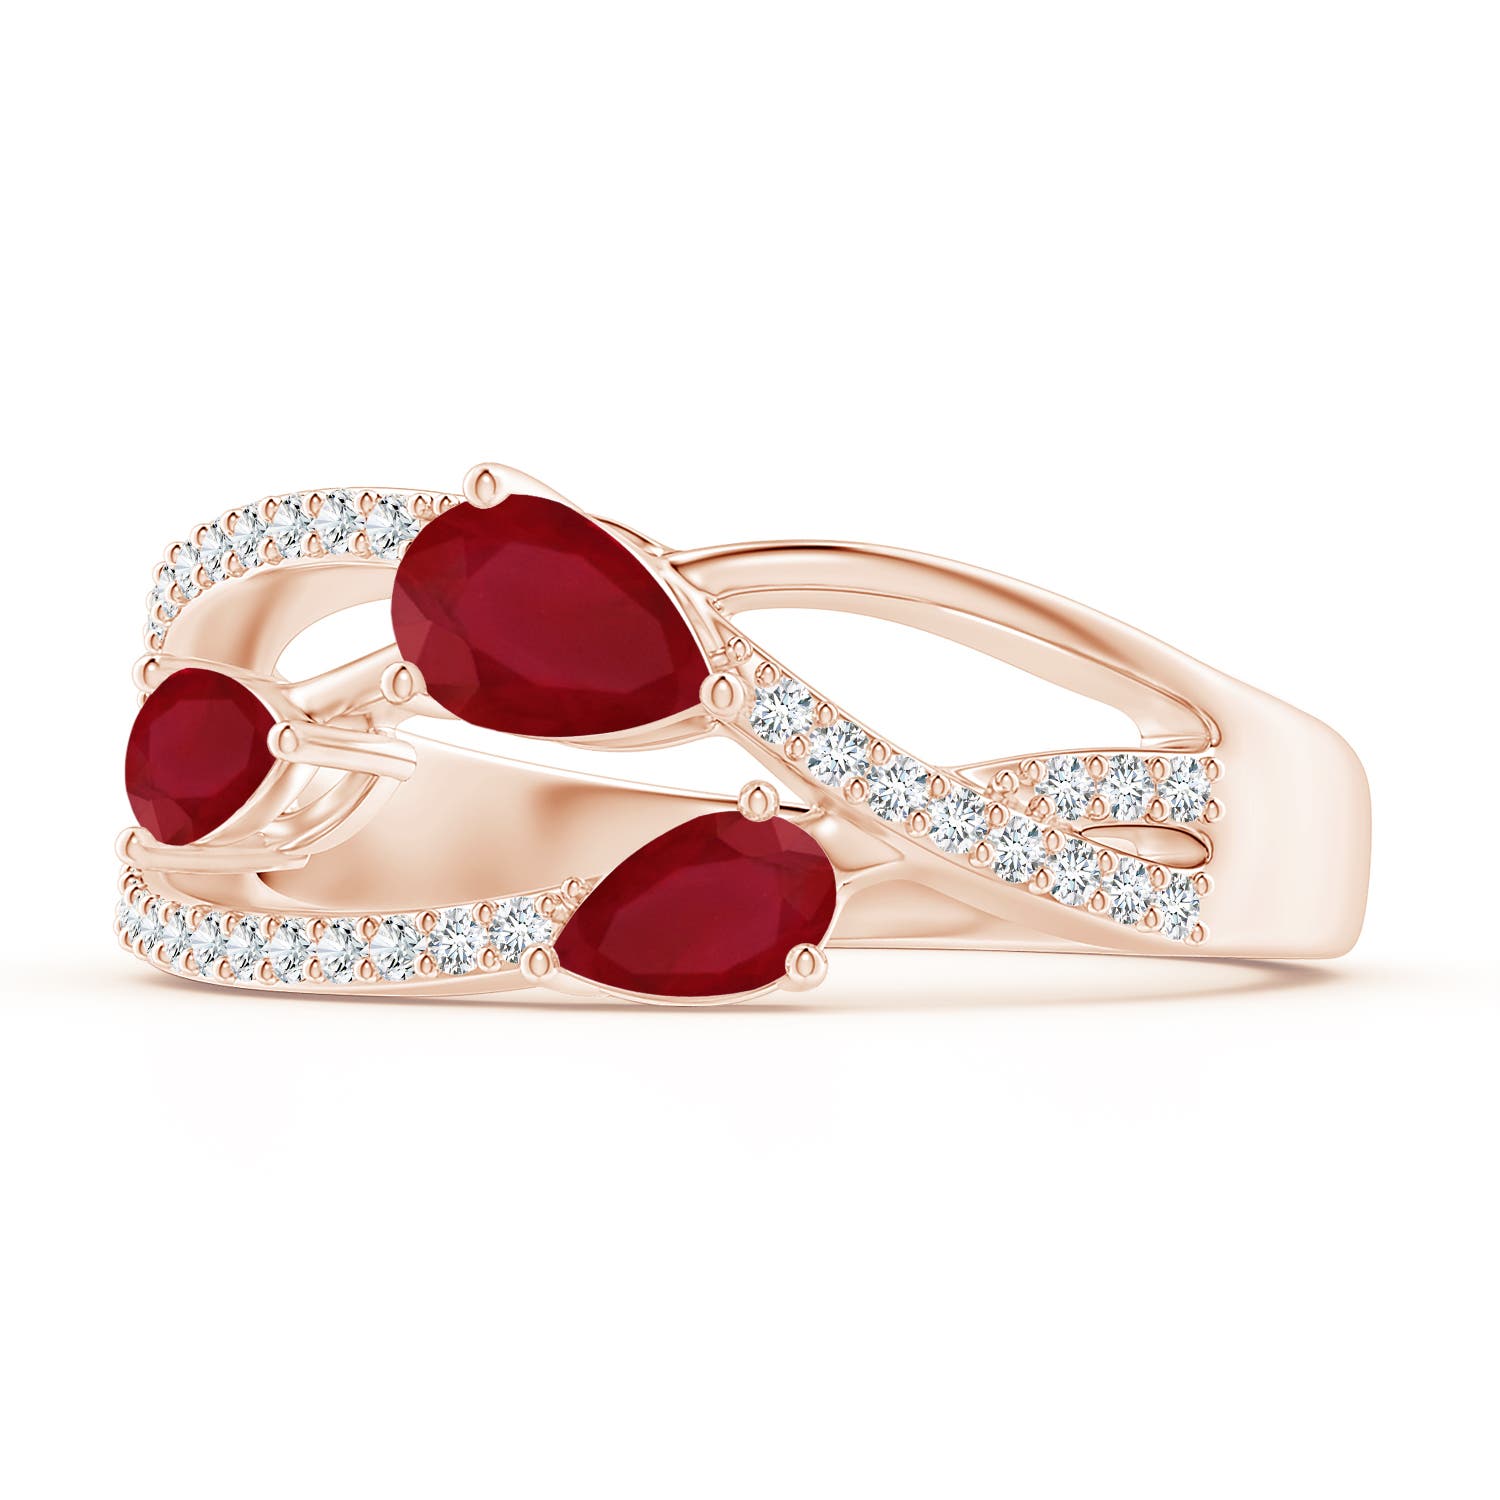 AA - Ruby / 1.03 CT / 14 KT Rose Gold